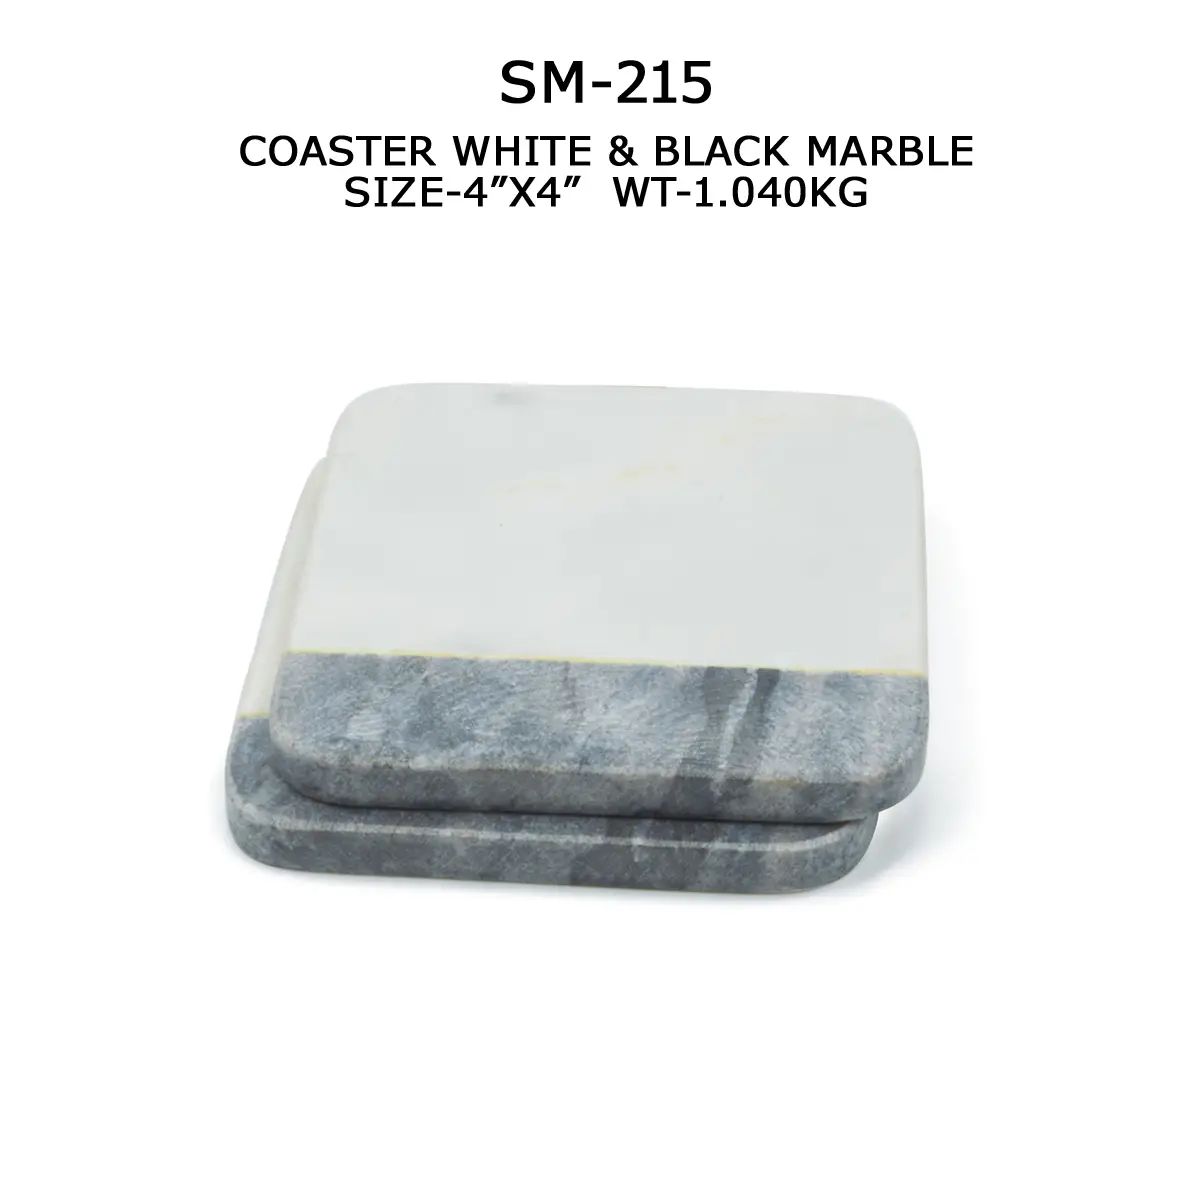 COASTER WHITE AND BLACK MARBLE